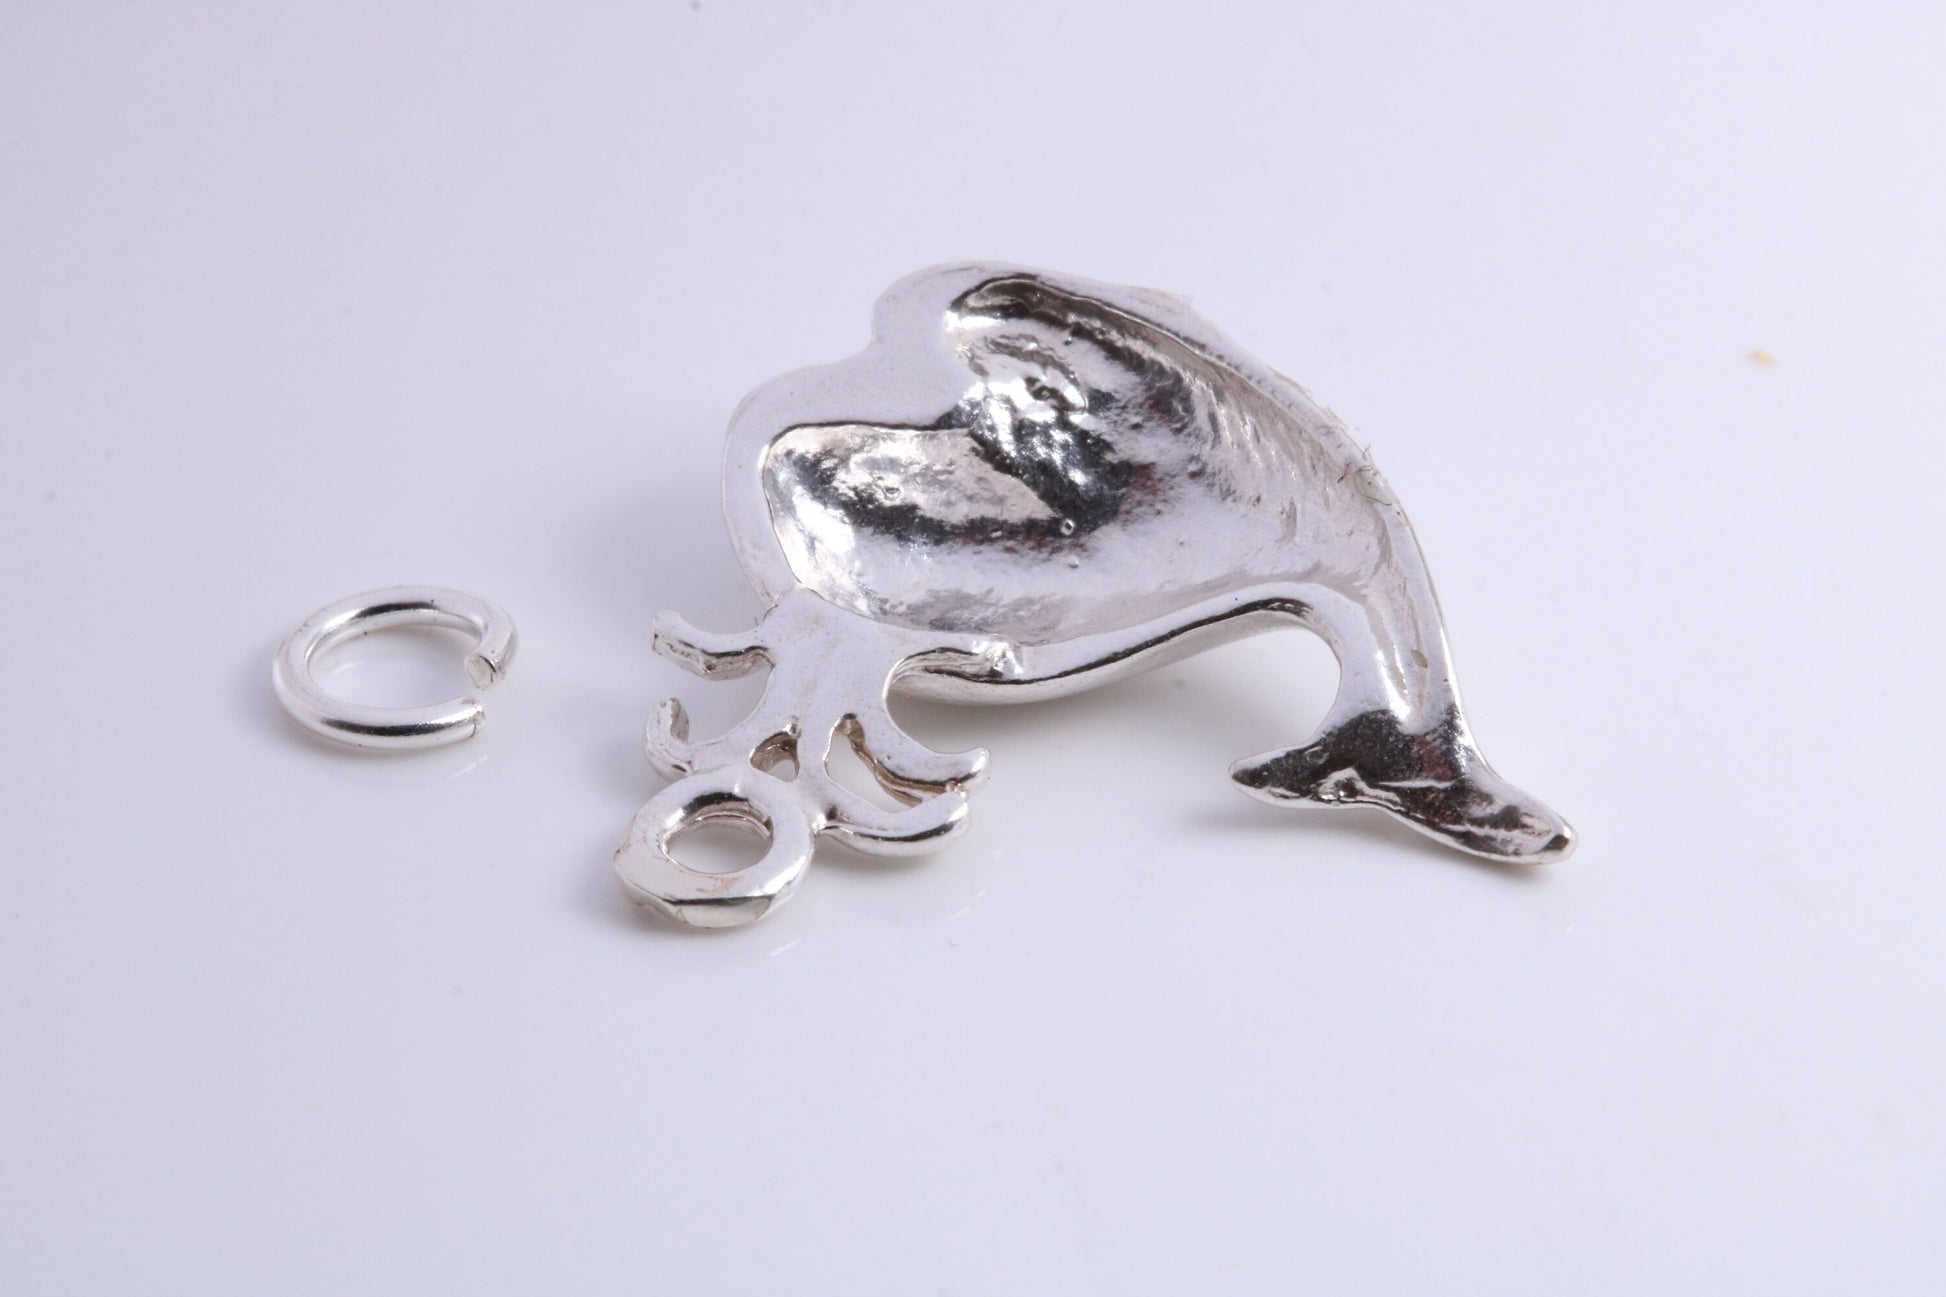 Whale Charm, Traditional Charm, Made from Solid 925 Grade Sterling Silver, Complete with Attachment Link